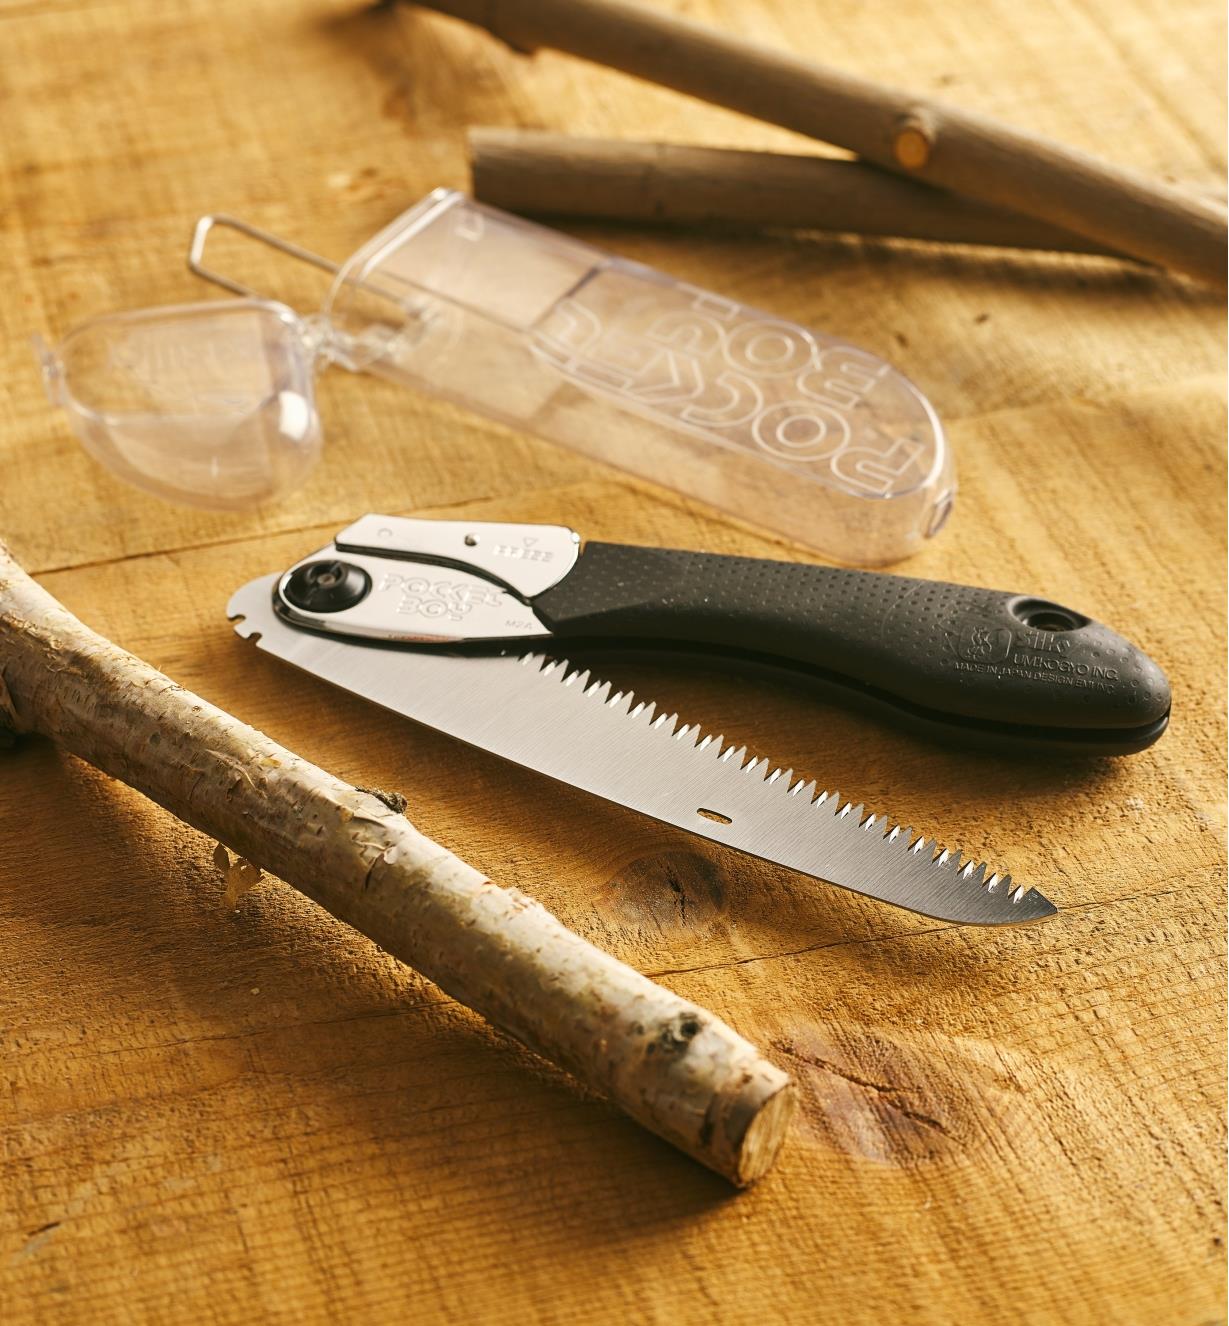 A folded Silky Pocketboy 170M folding saw and storage case shown with pruned branches